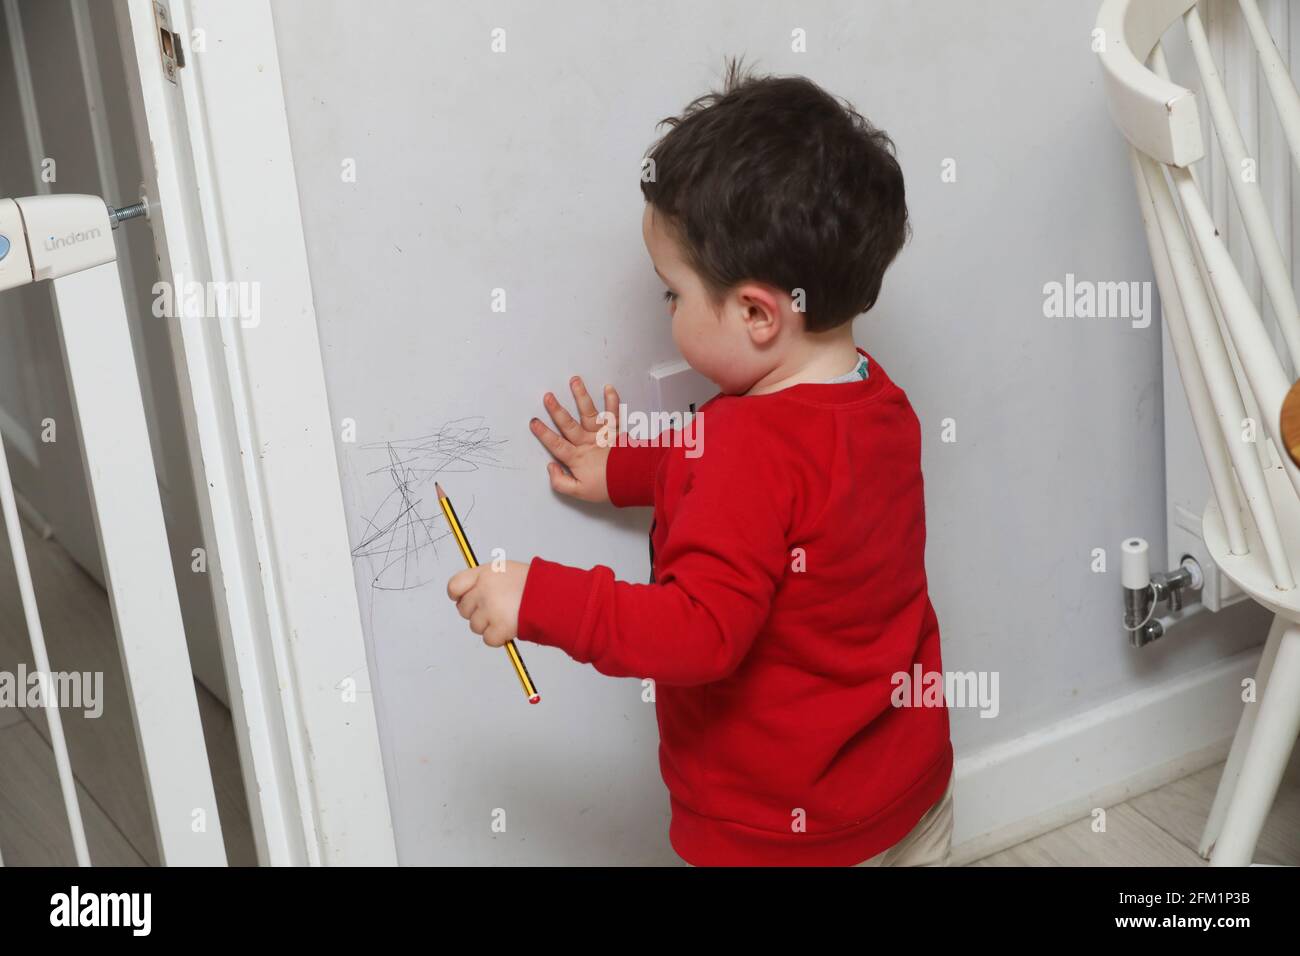 A young boy pictured drawing on the walls with a pencil in West Sussex, UK. Stock Photo